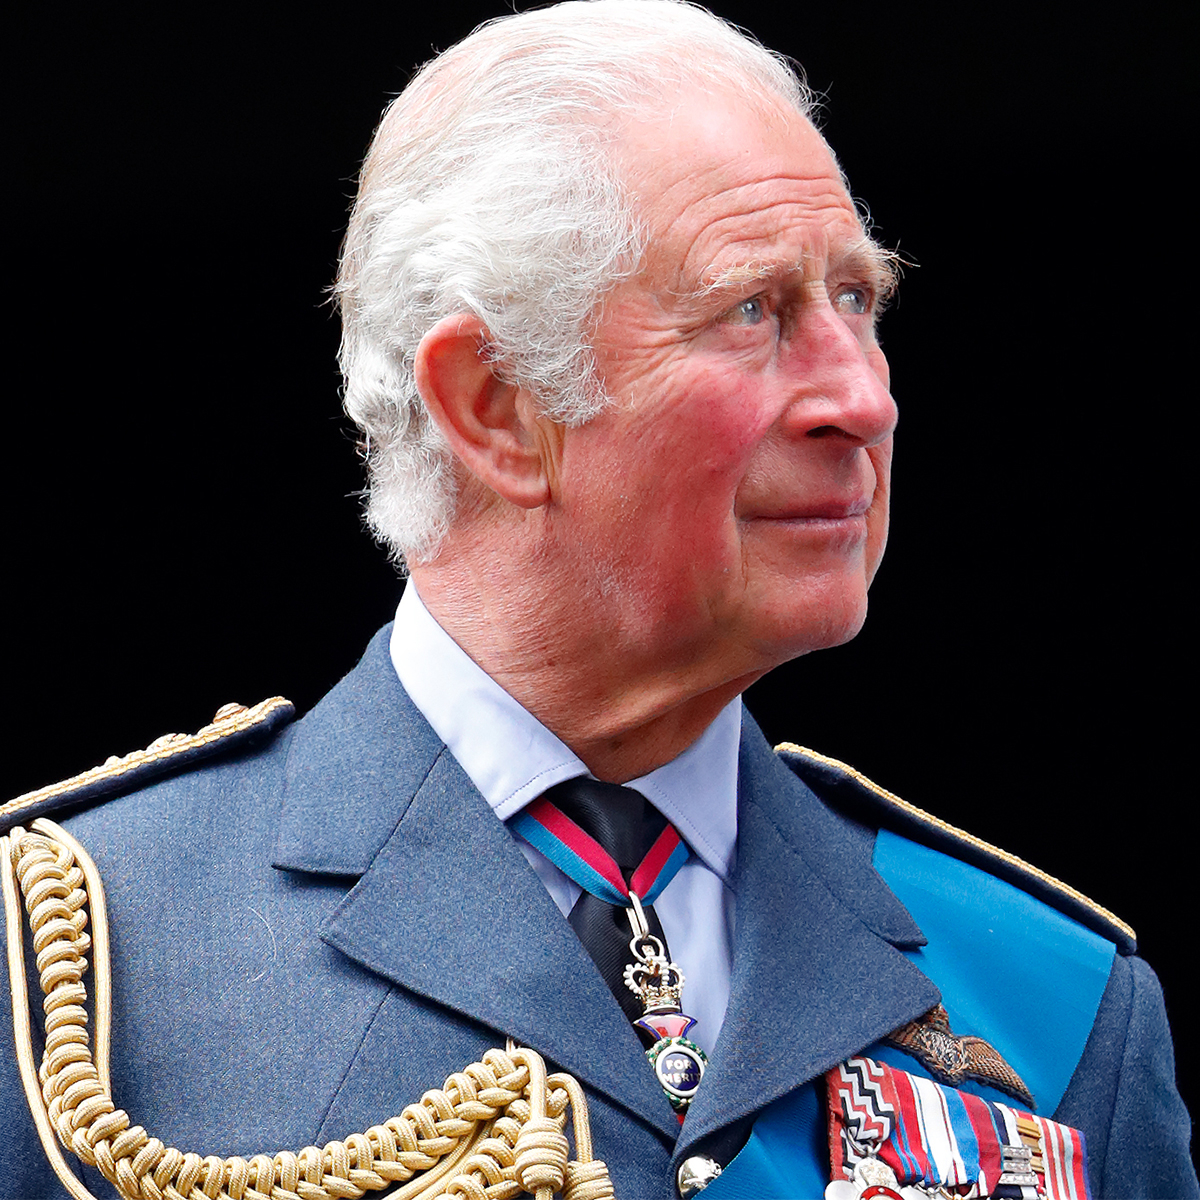 Prince Charles becomes King of England at 73 following Queen